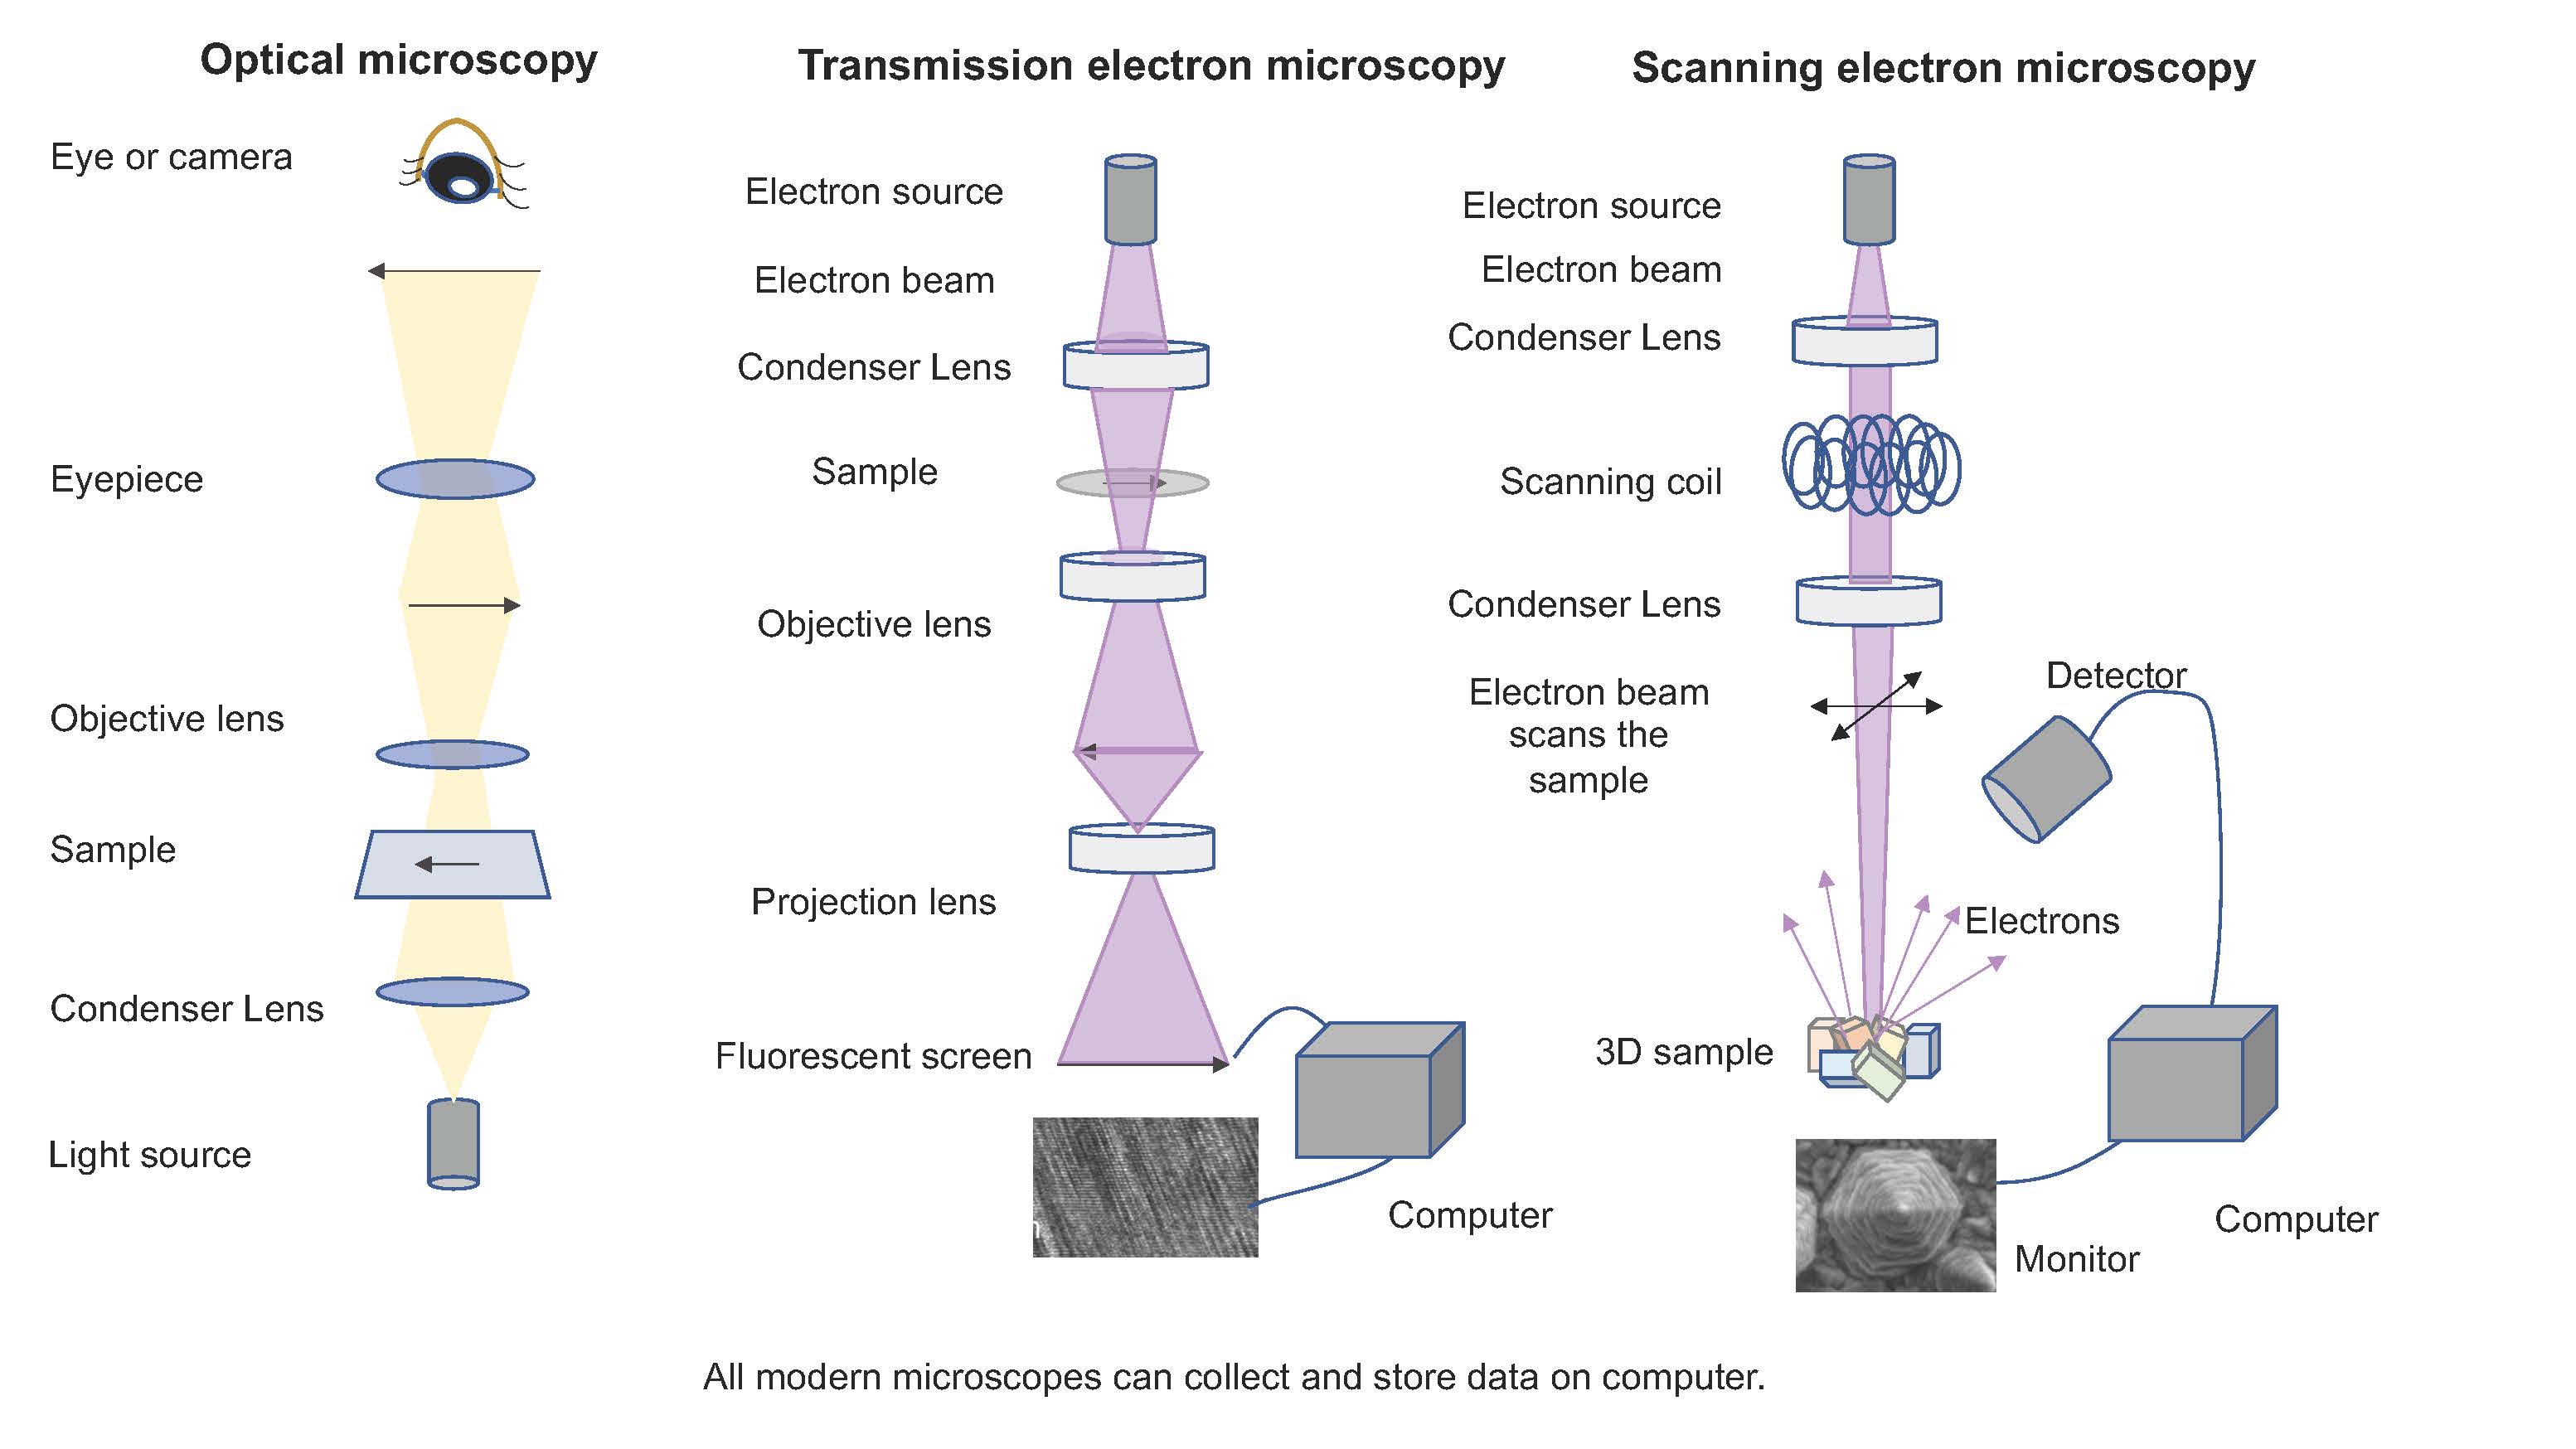 comparison of optical and electron microscopies